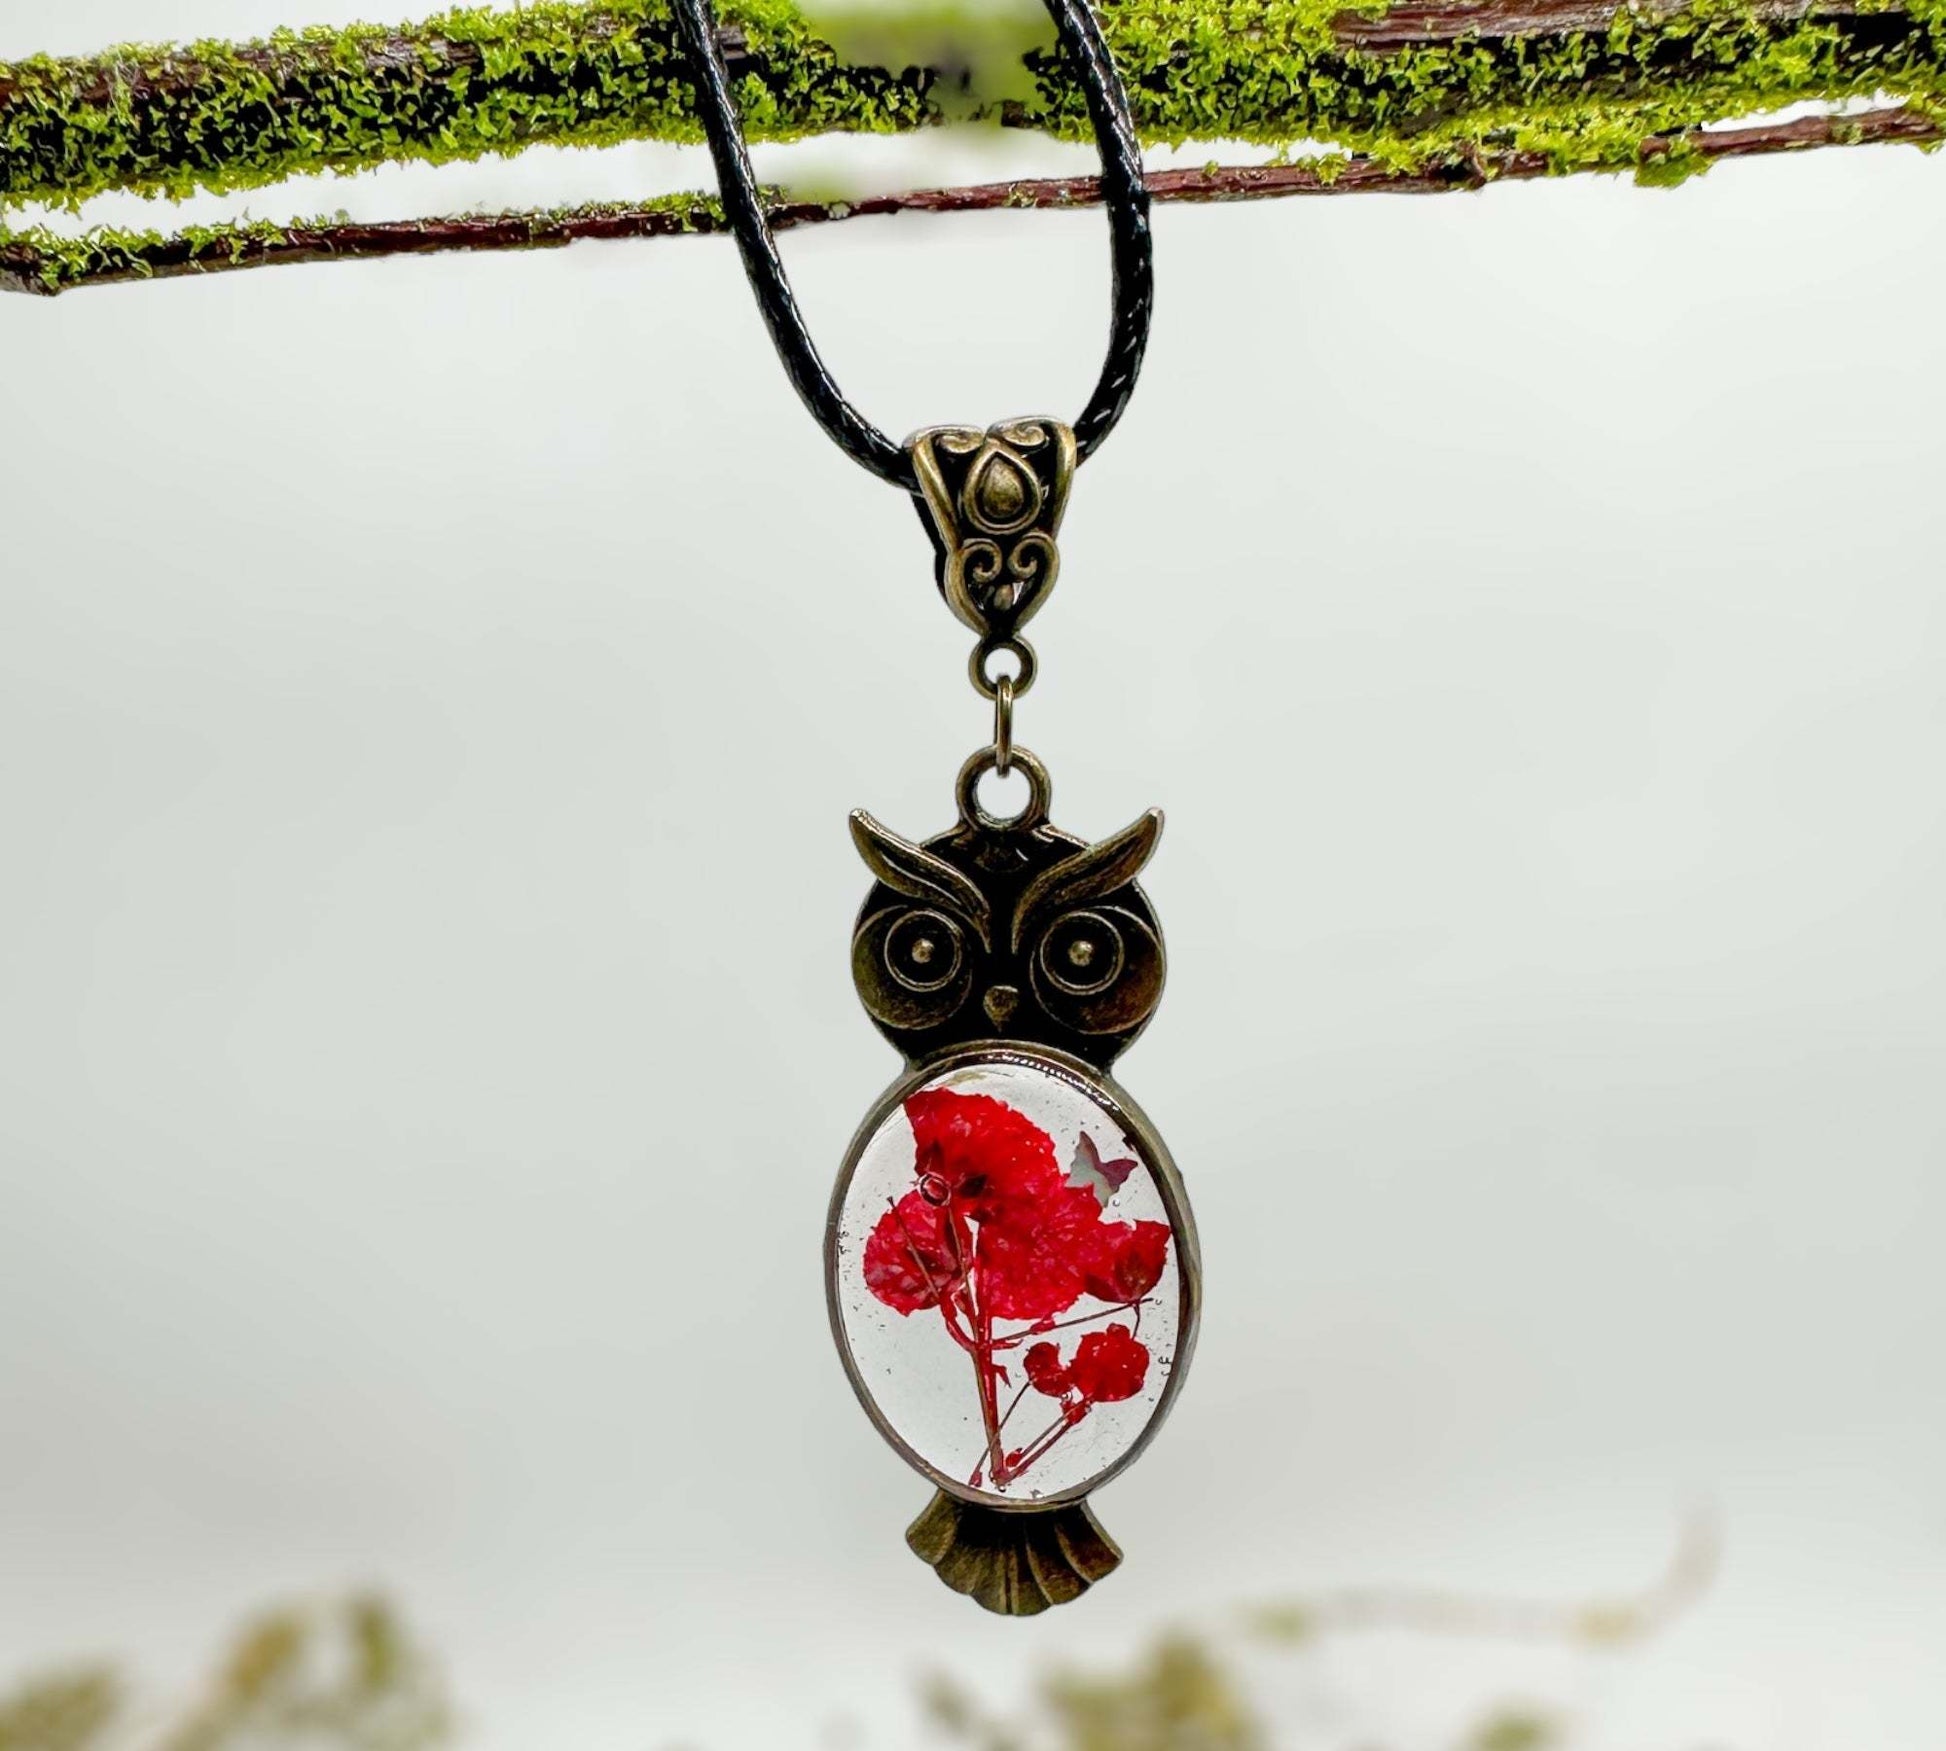 Owl Pendant - Red Blooms and Butterflies - Pressed Flower Necklace